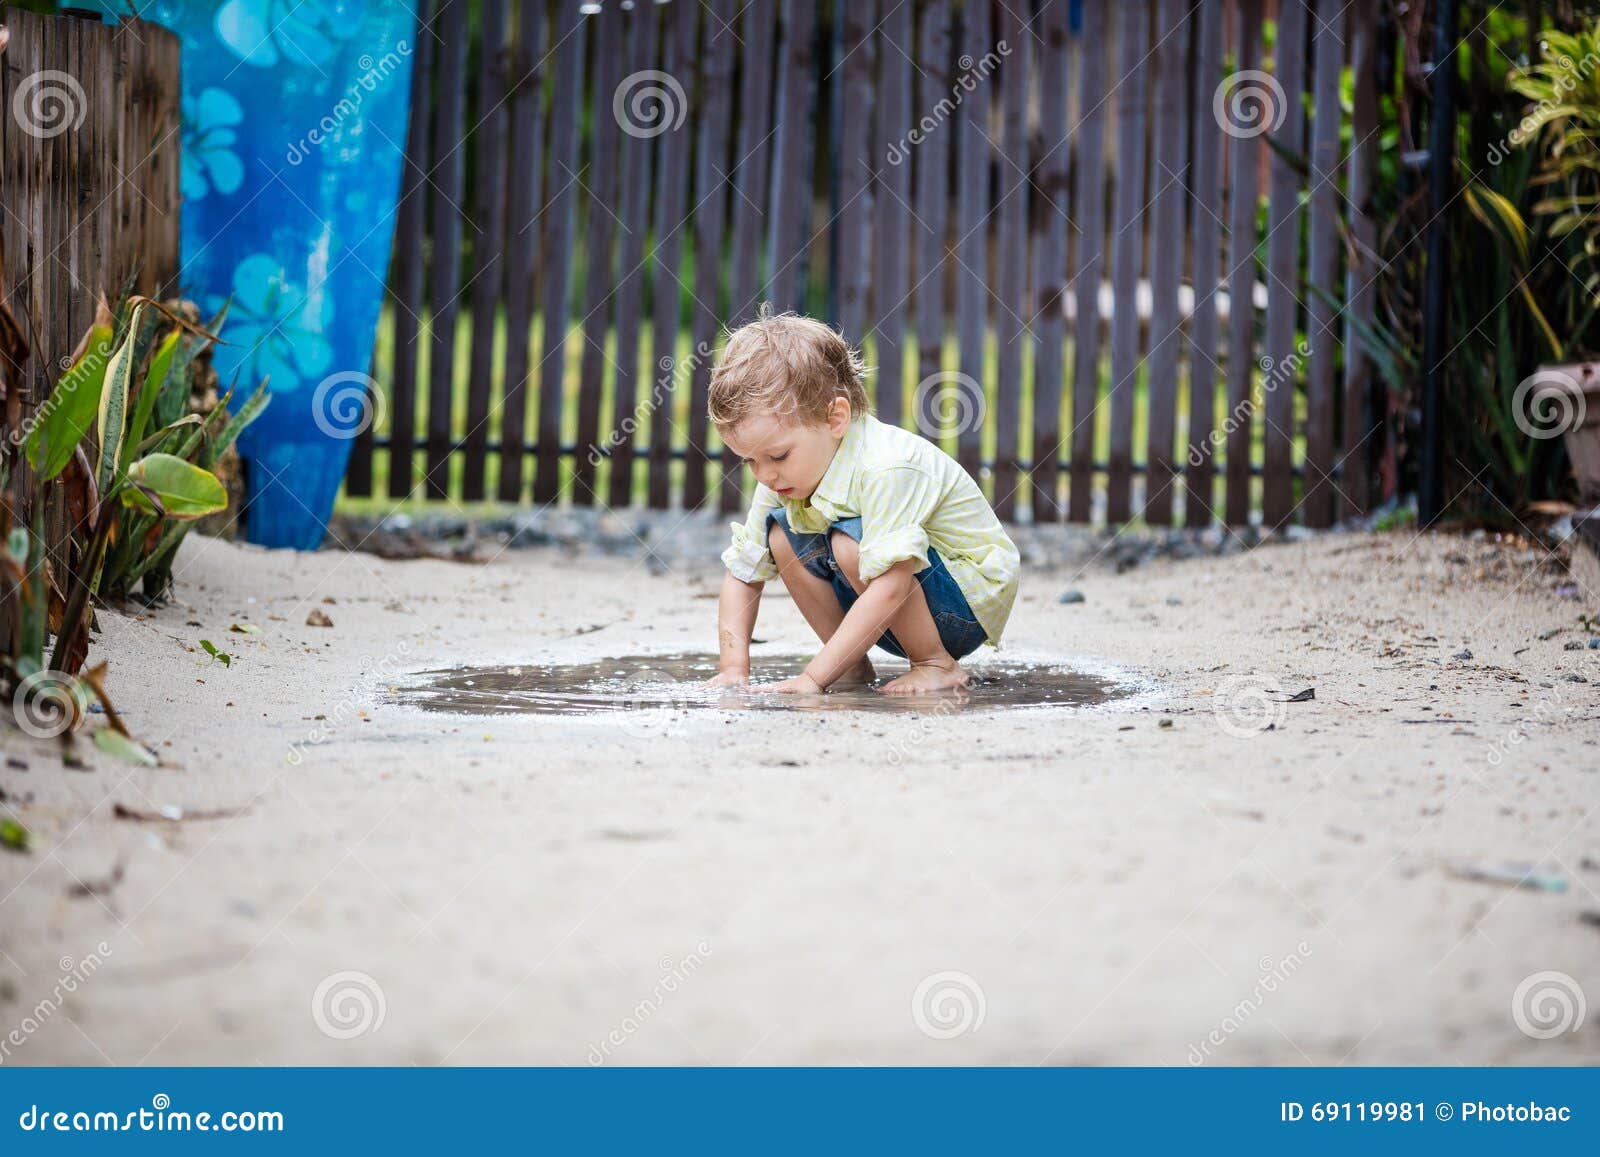 cute barefoot boy plunging hands in puddle